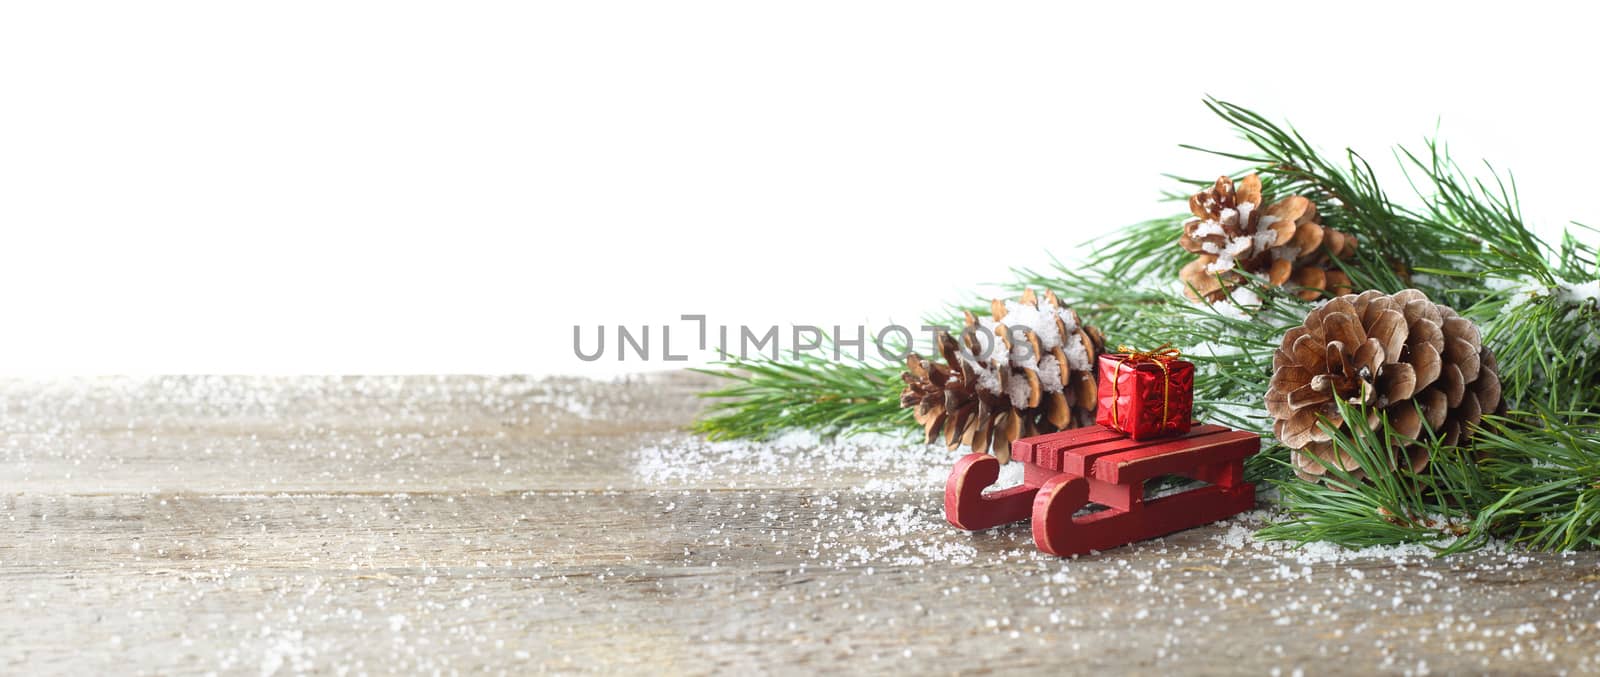 Christmas card. Pine cone and green branch on wooden table with snow, copy space for text, isolated on white background